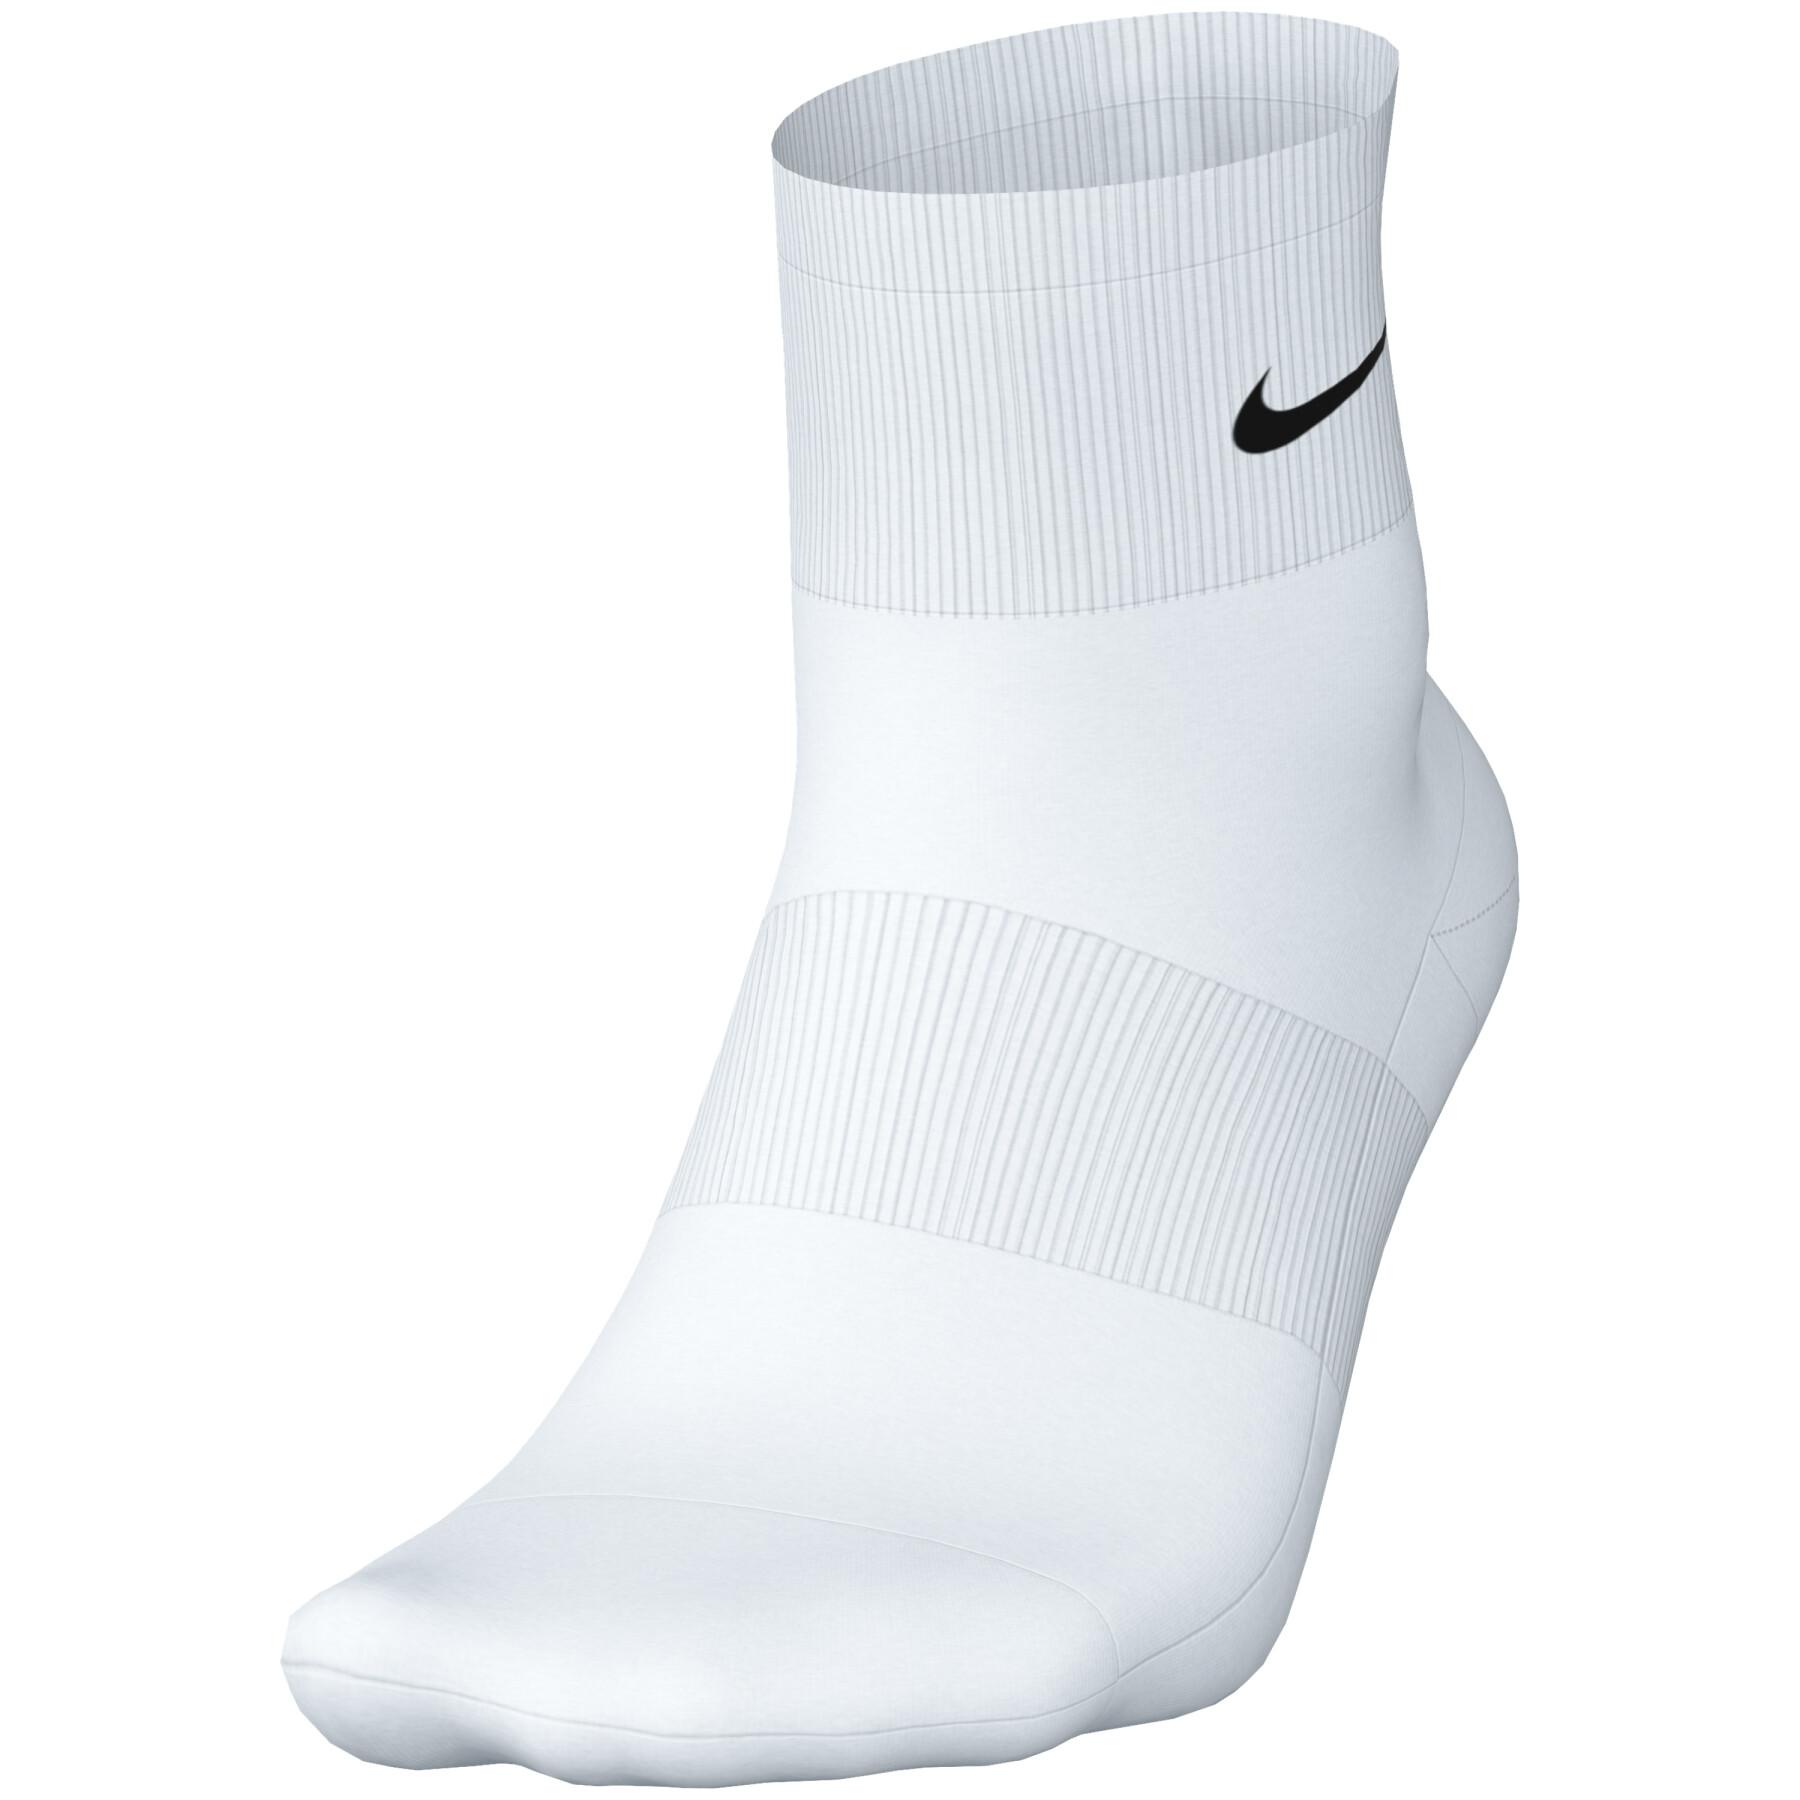 Chaussettes femme Nike Everyday Lightweight - Nike - Chaussettes - Textile